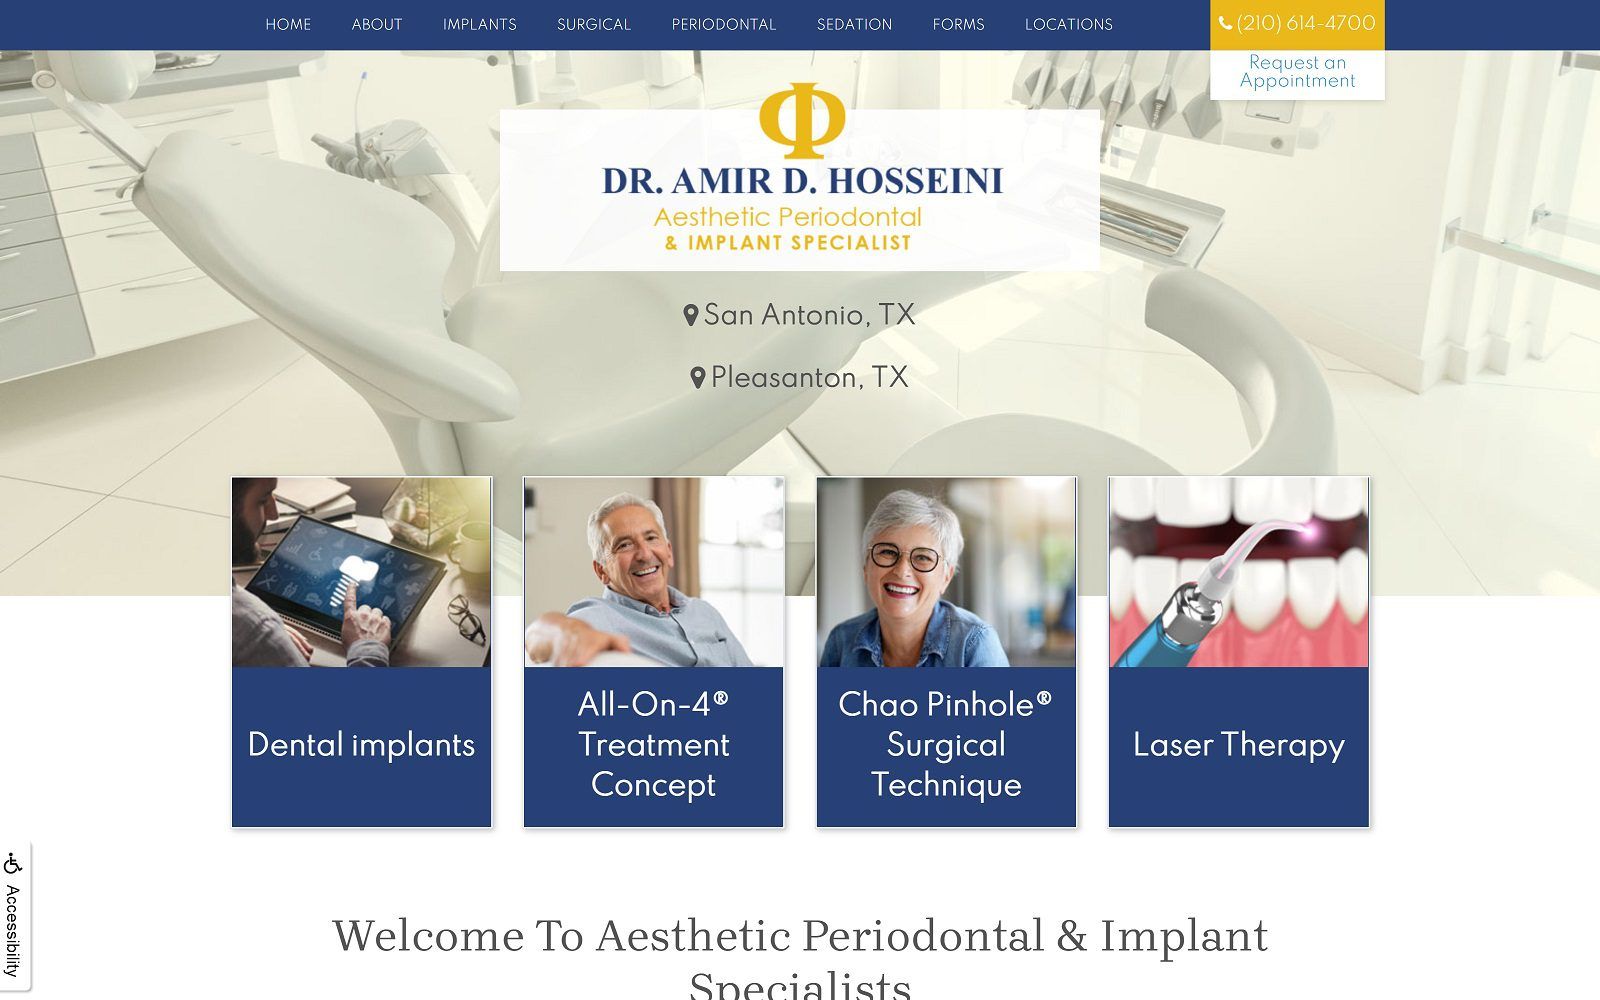 The screenshot of aesthetic periodontal & implant specialists